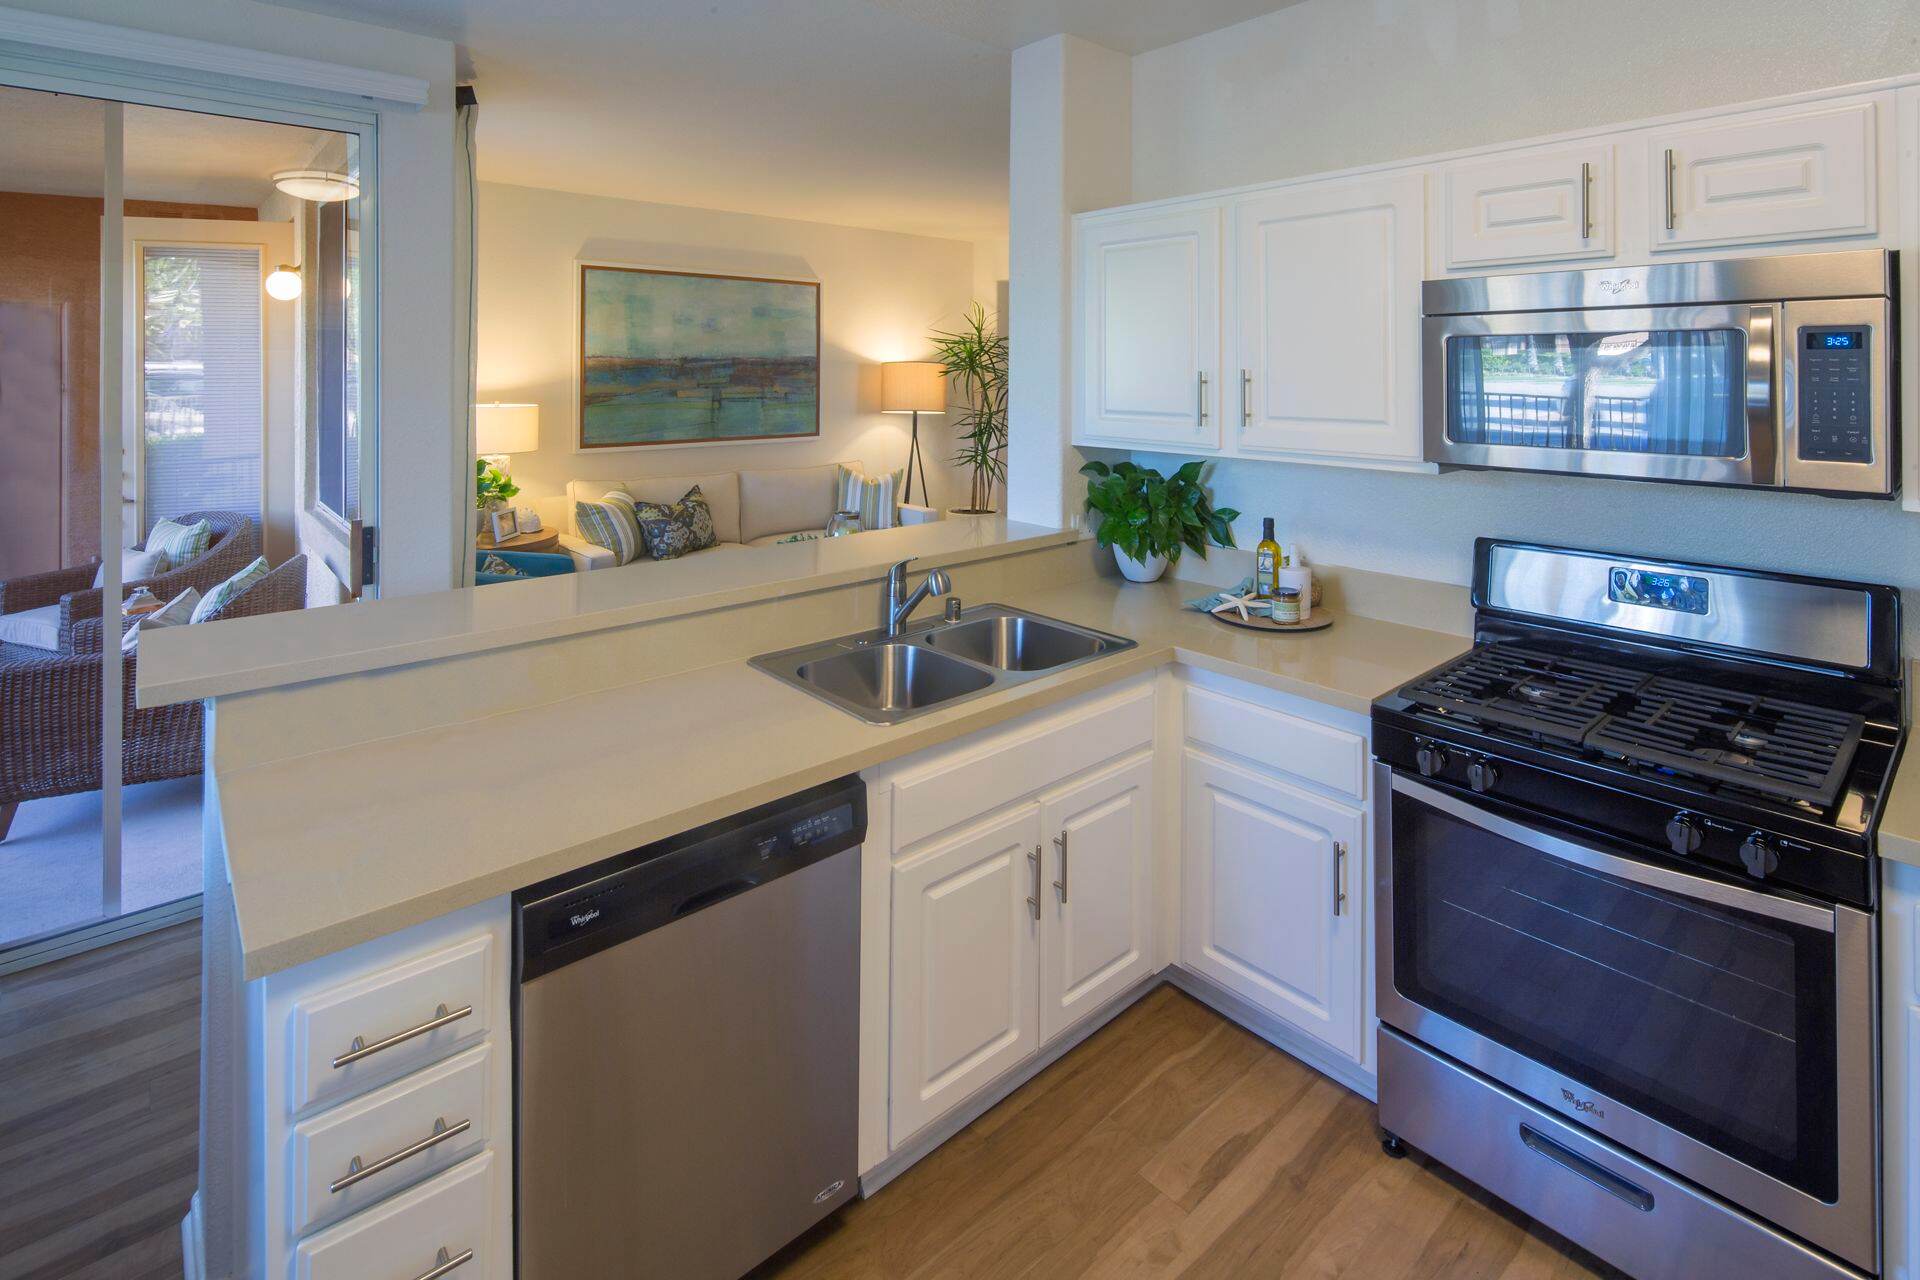 Interior view of kitchen and living area at Torrey Hills Apartment Homes in San Diego, CA.